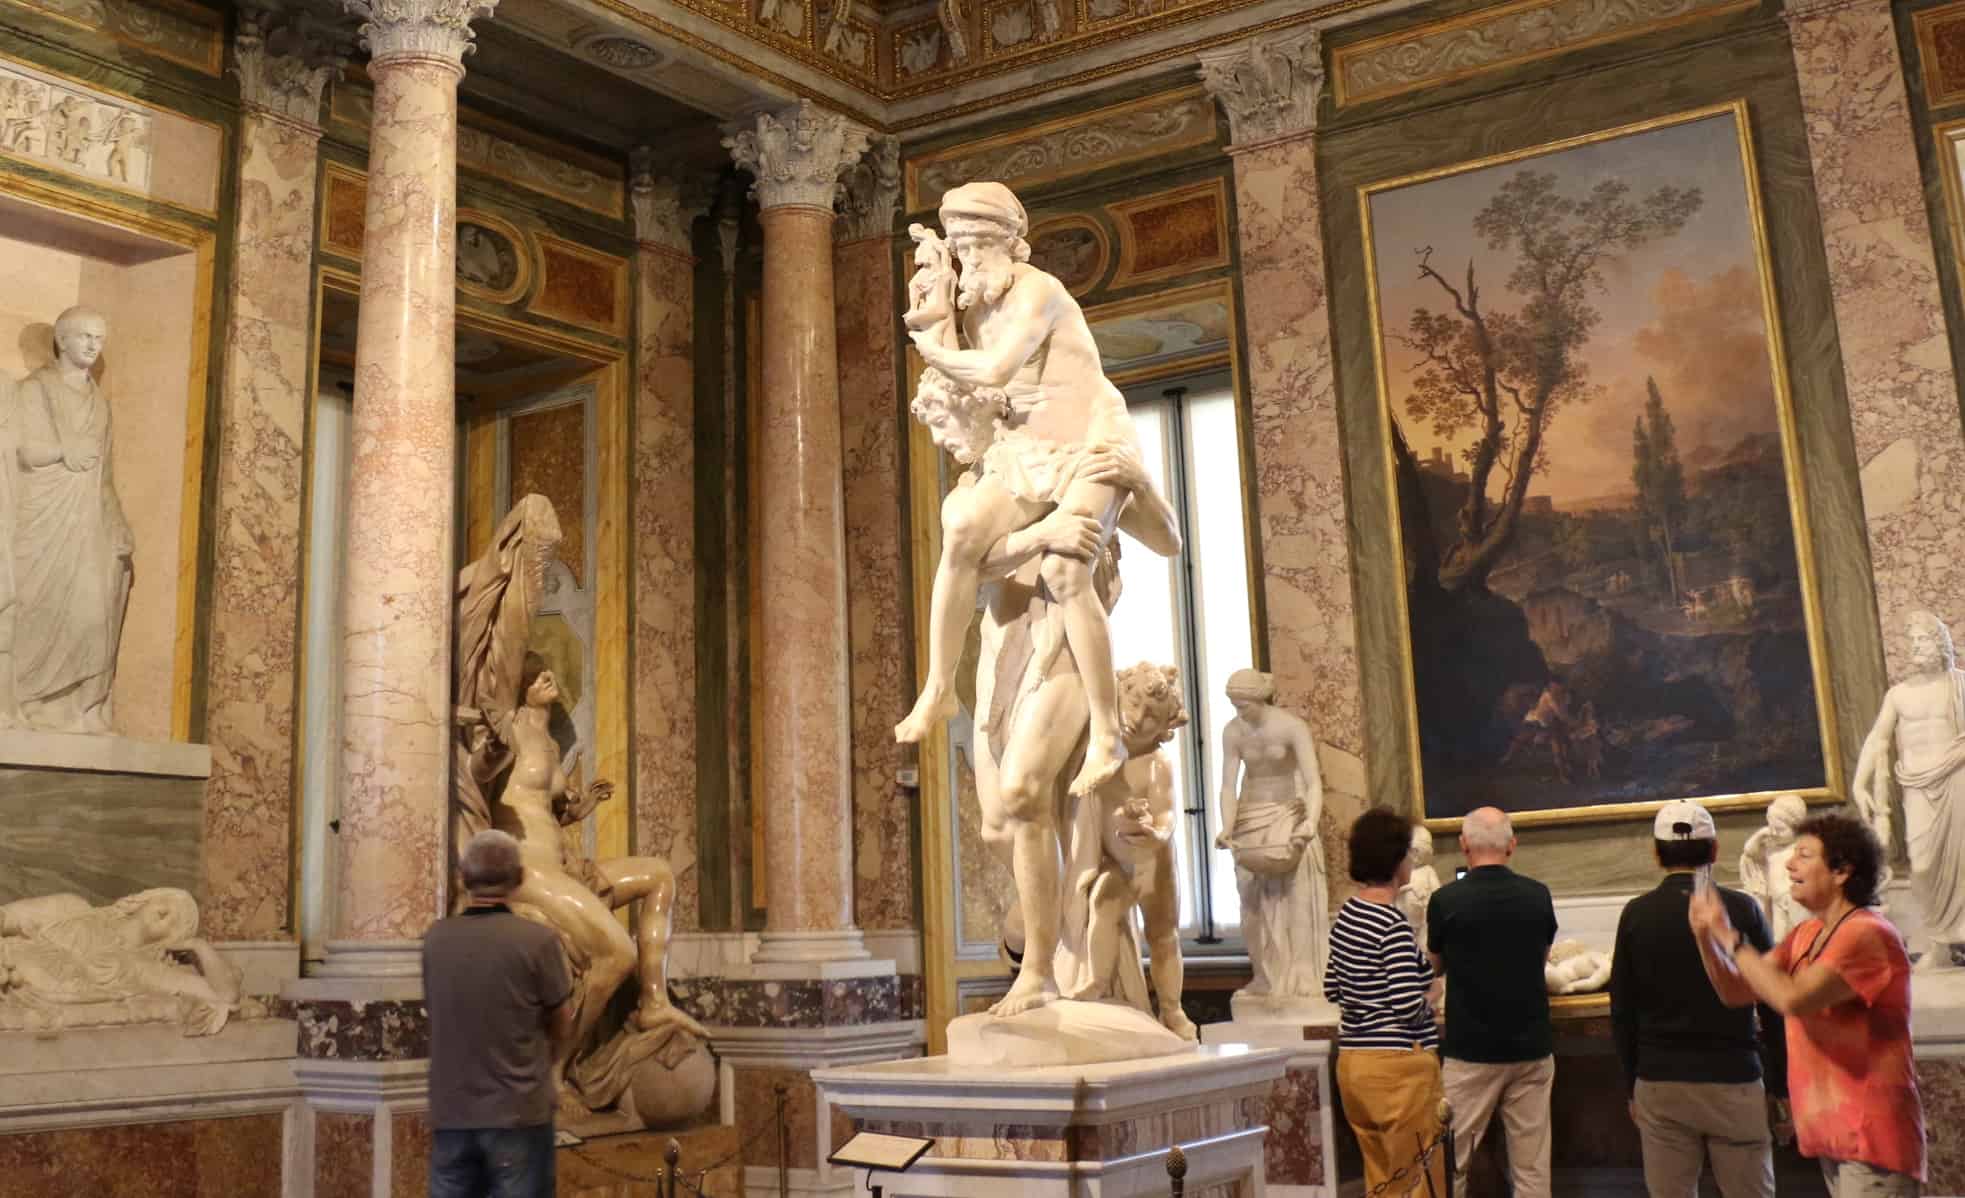 Aeneas, Anchises and Ascanius by Bernini  - things to see in the Borghese Gallery